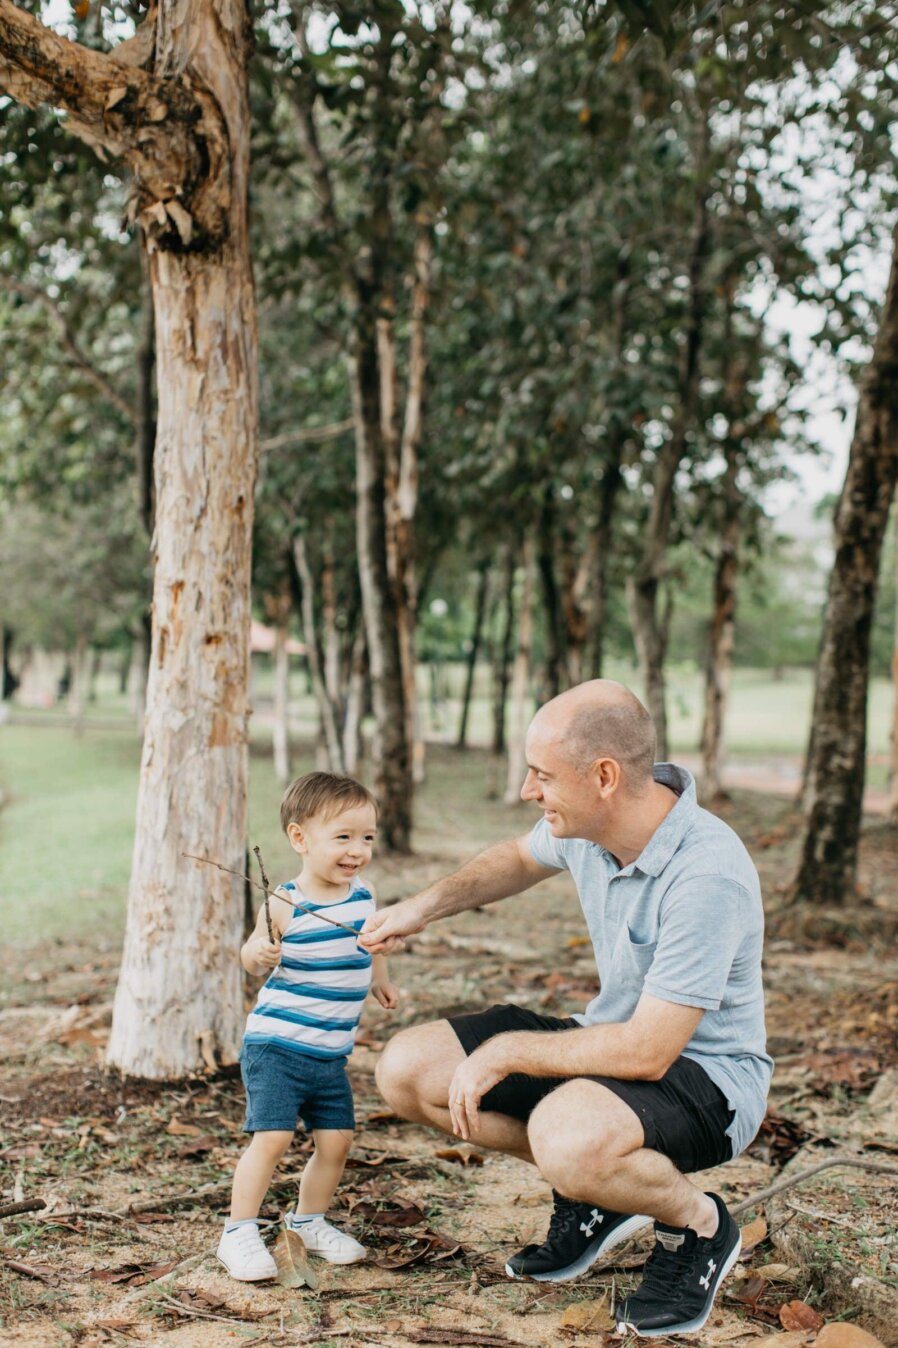 Cute little boy with daddy Damansar Tropical Family Portrait Session in Kuala Lumpur Malaysia